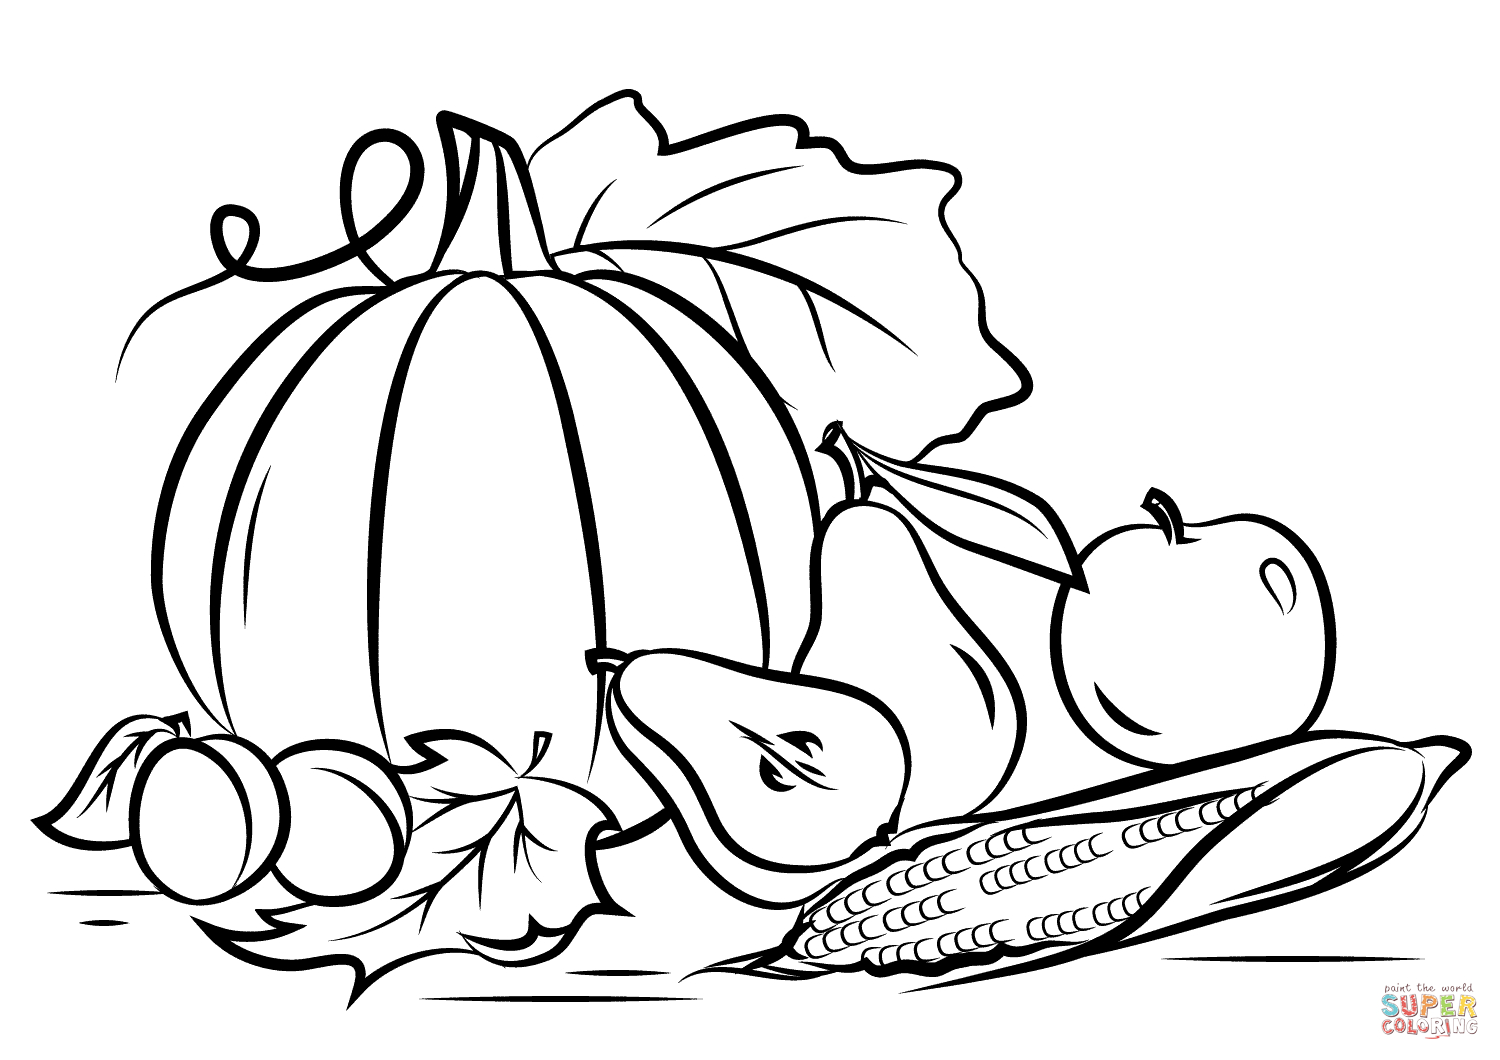 Autumn Harvest Coloring Page | Free Printable Coloring Pages - Free Fall Printable Coloring Sheets